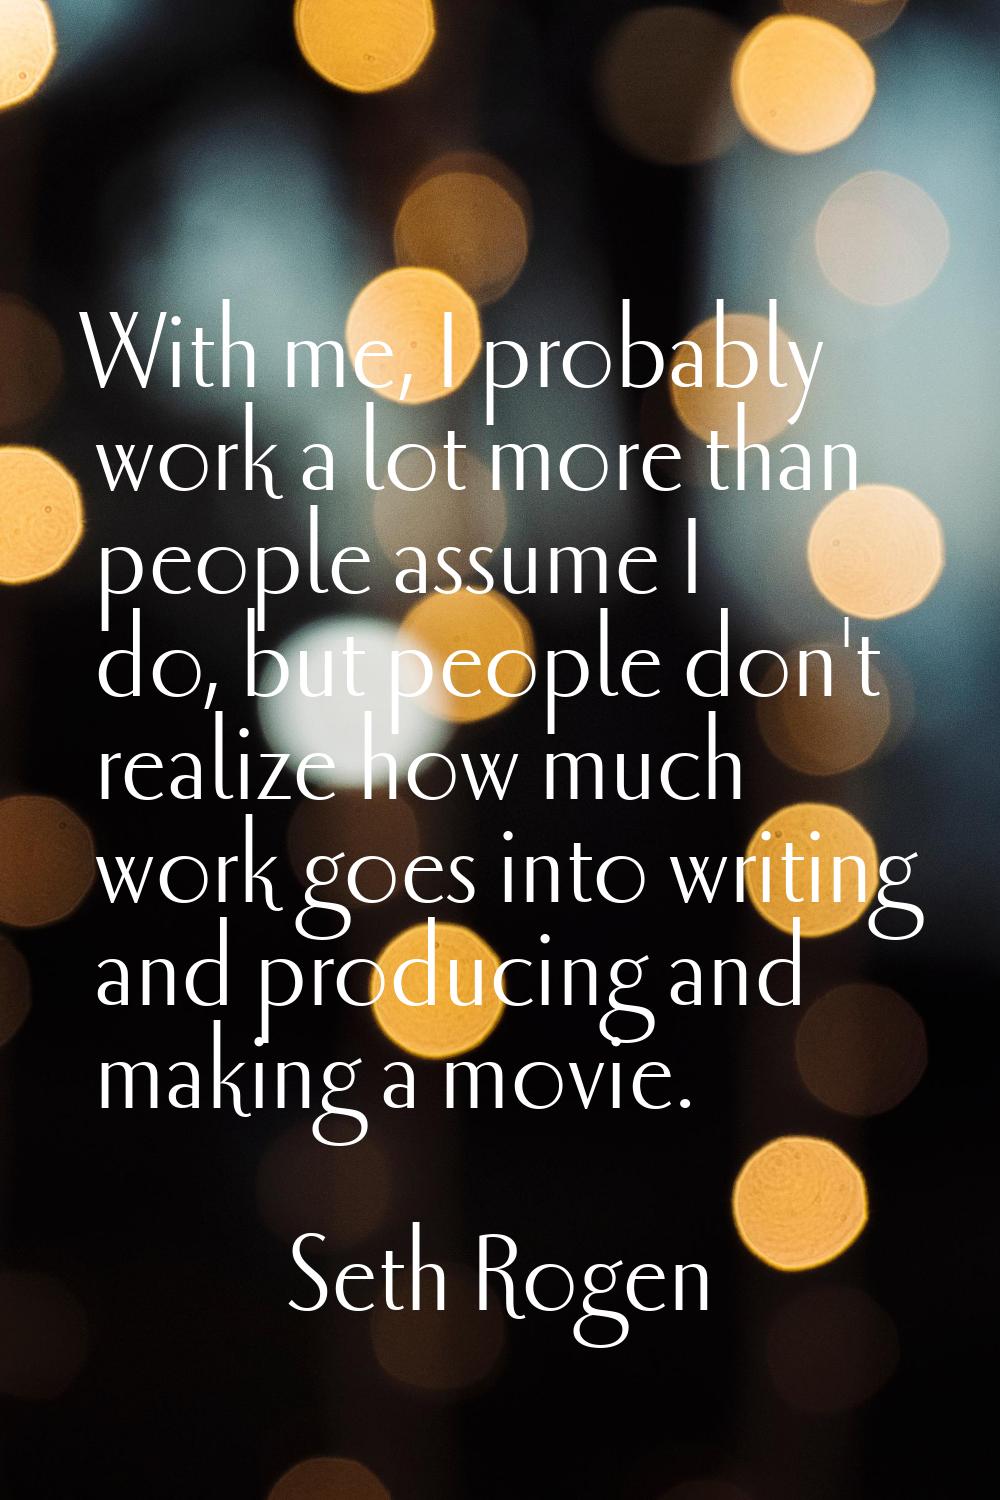 With me, I probably work a lot more than people assume I do, but people don't realize how much work